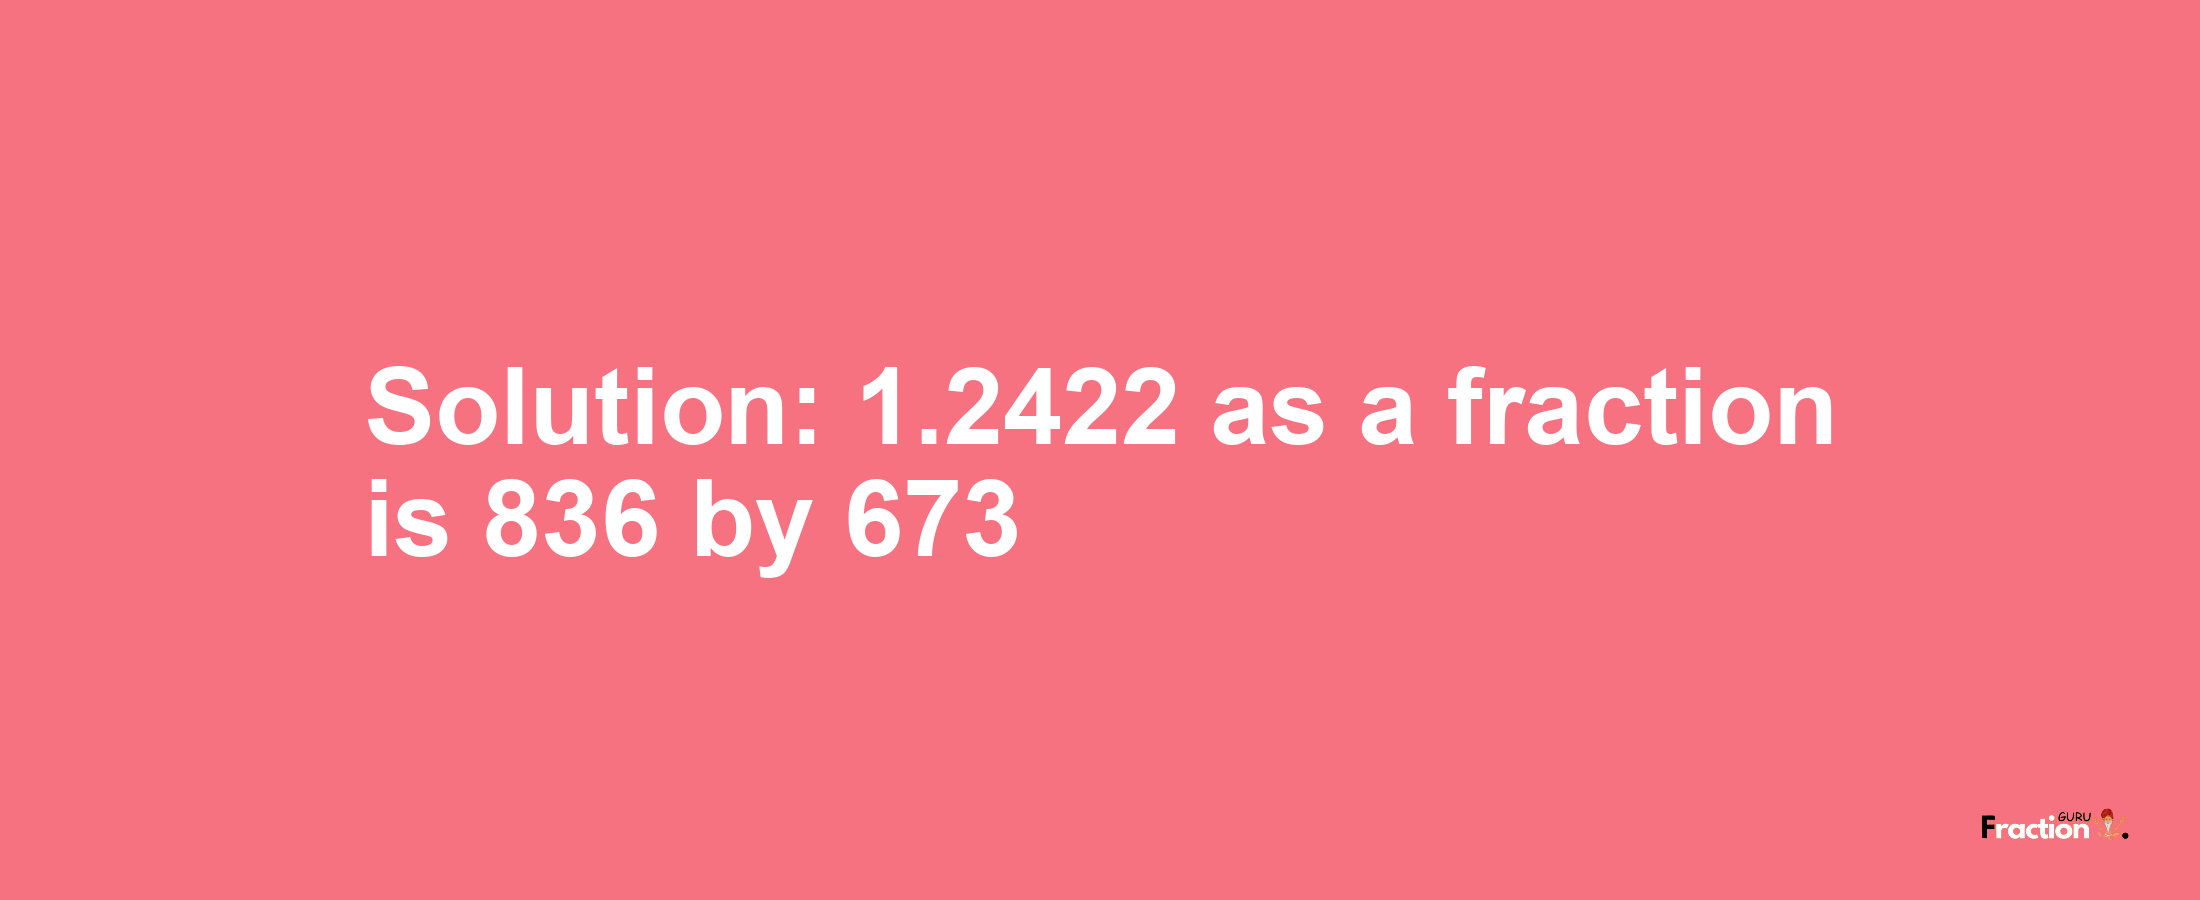 Solution:1.2422 as a fraction is 836/673